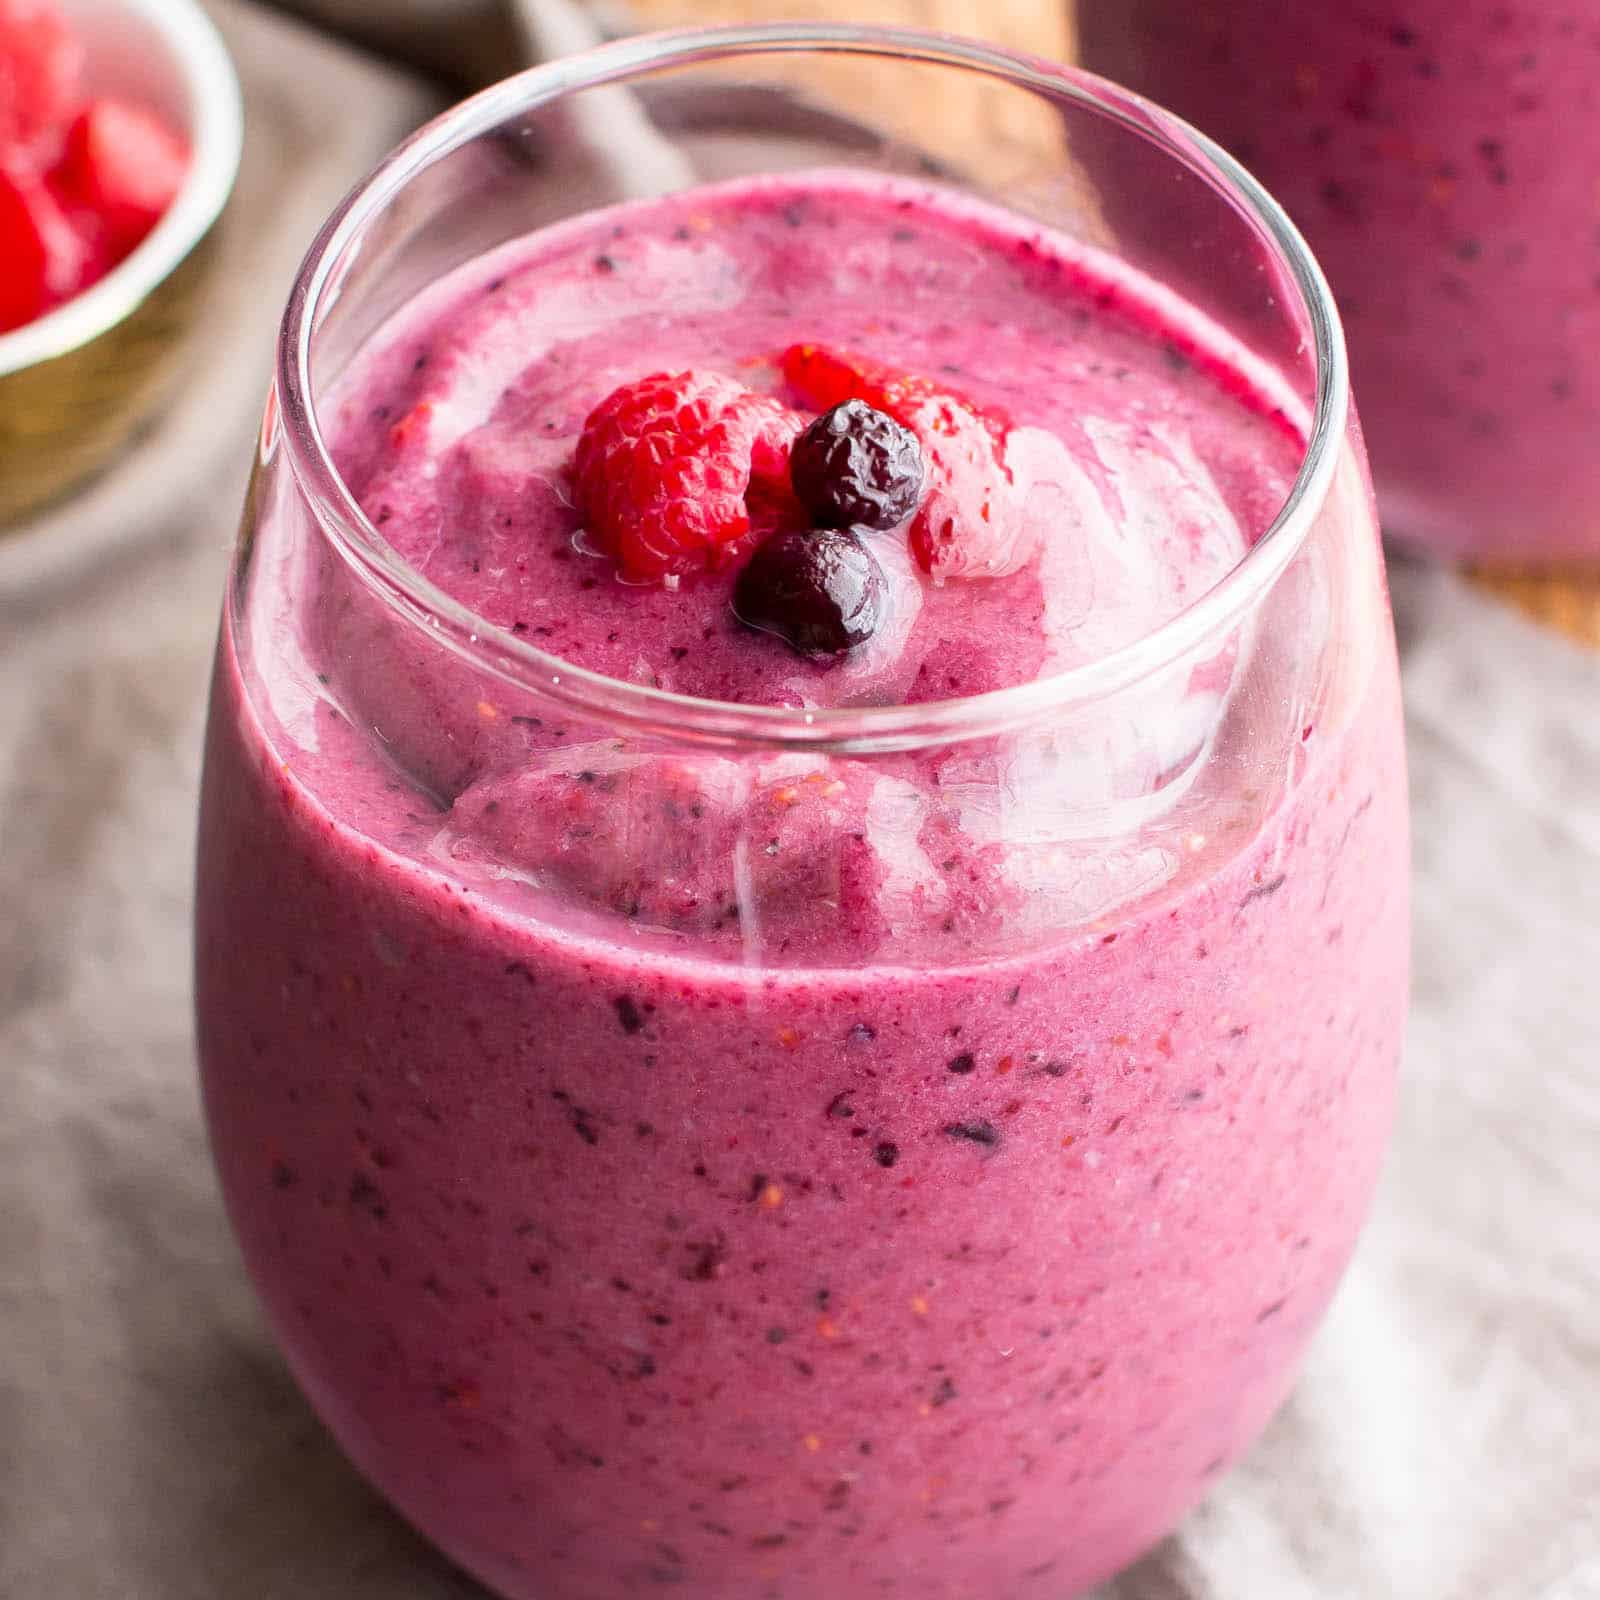 “15 Energizing Smoothie Recipes to Fuel Your Day!”